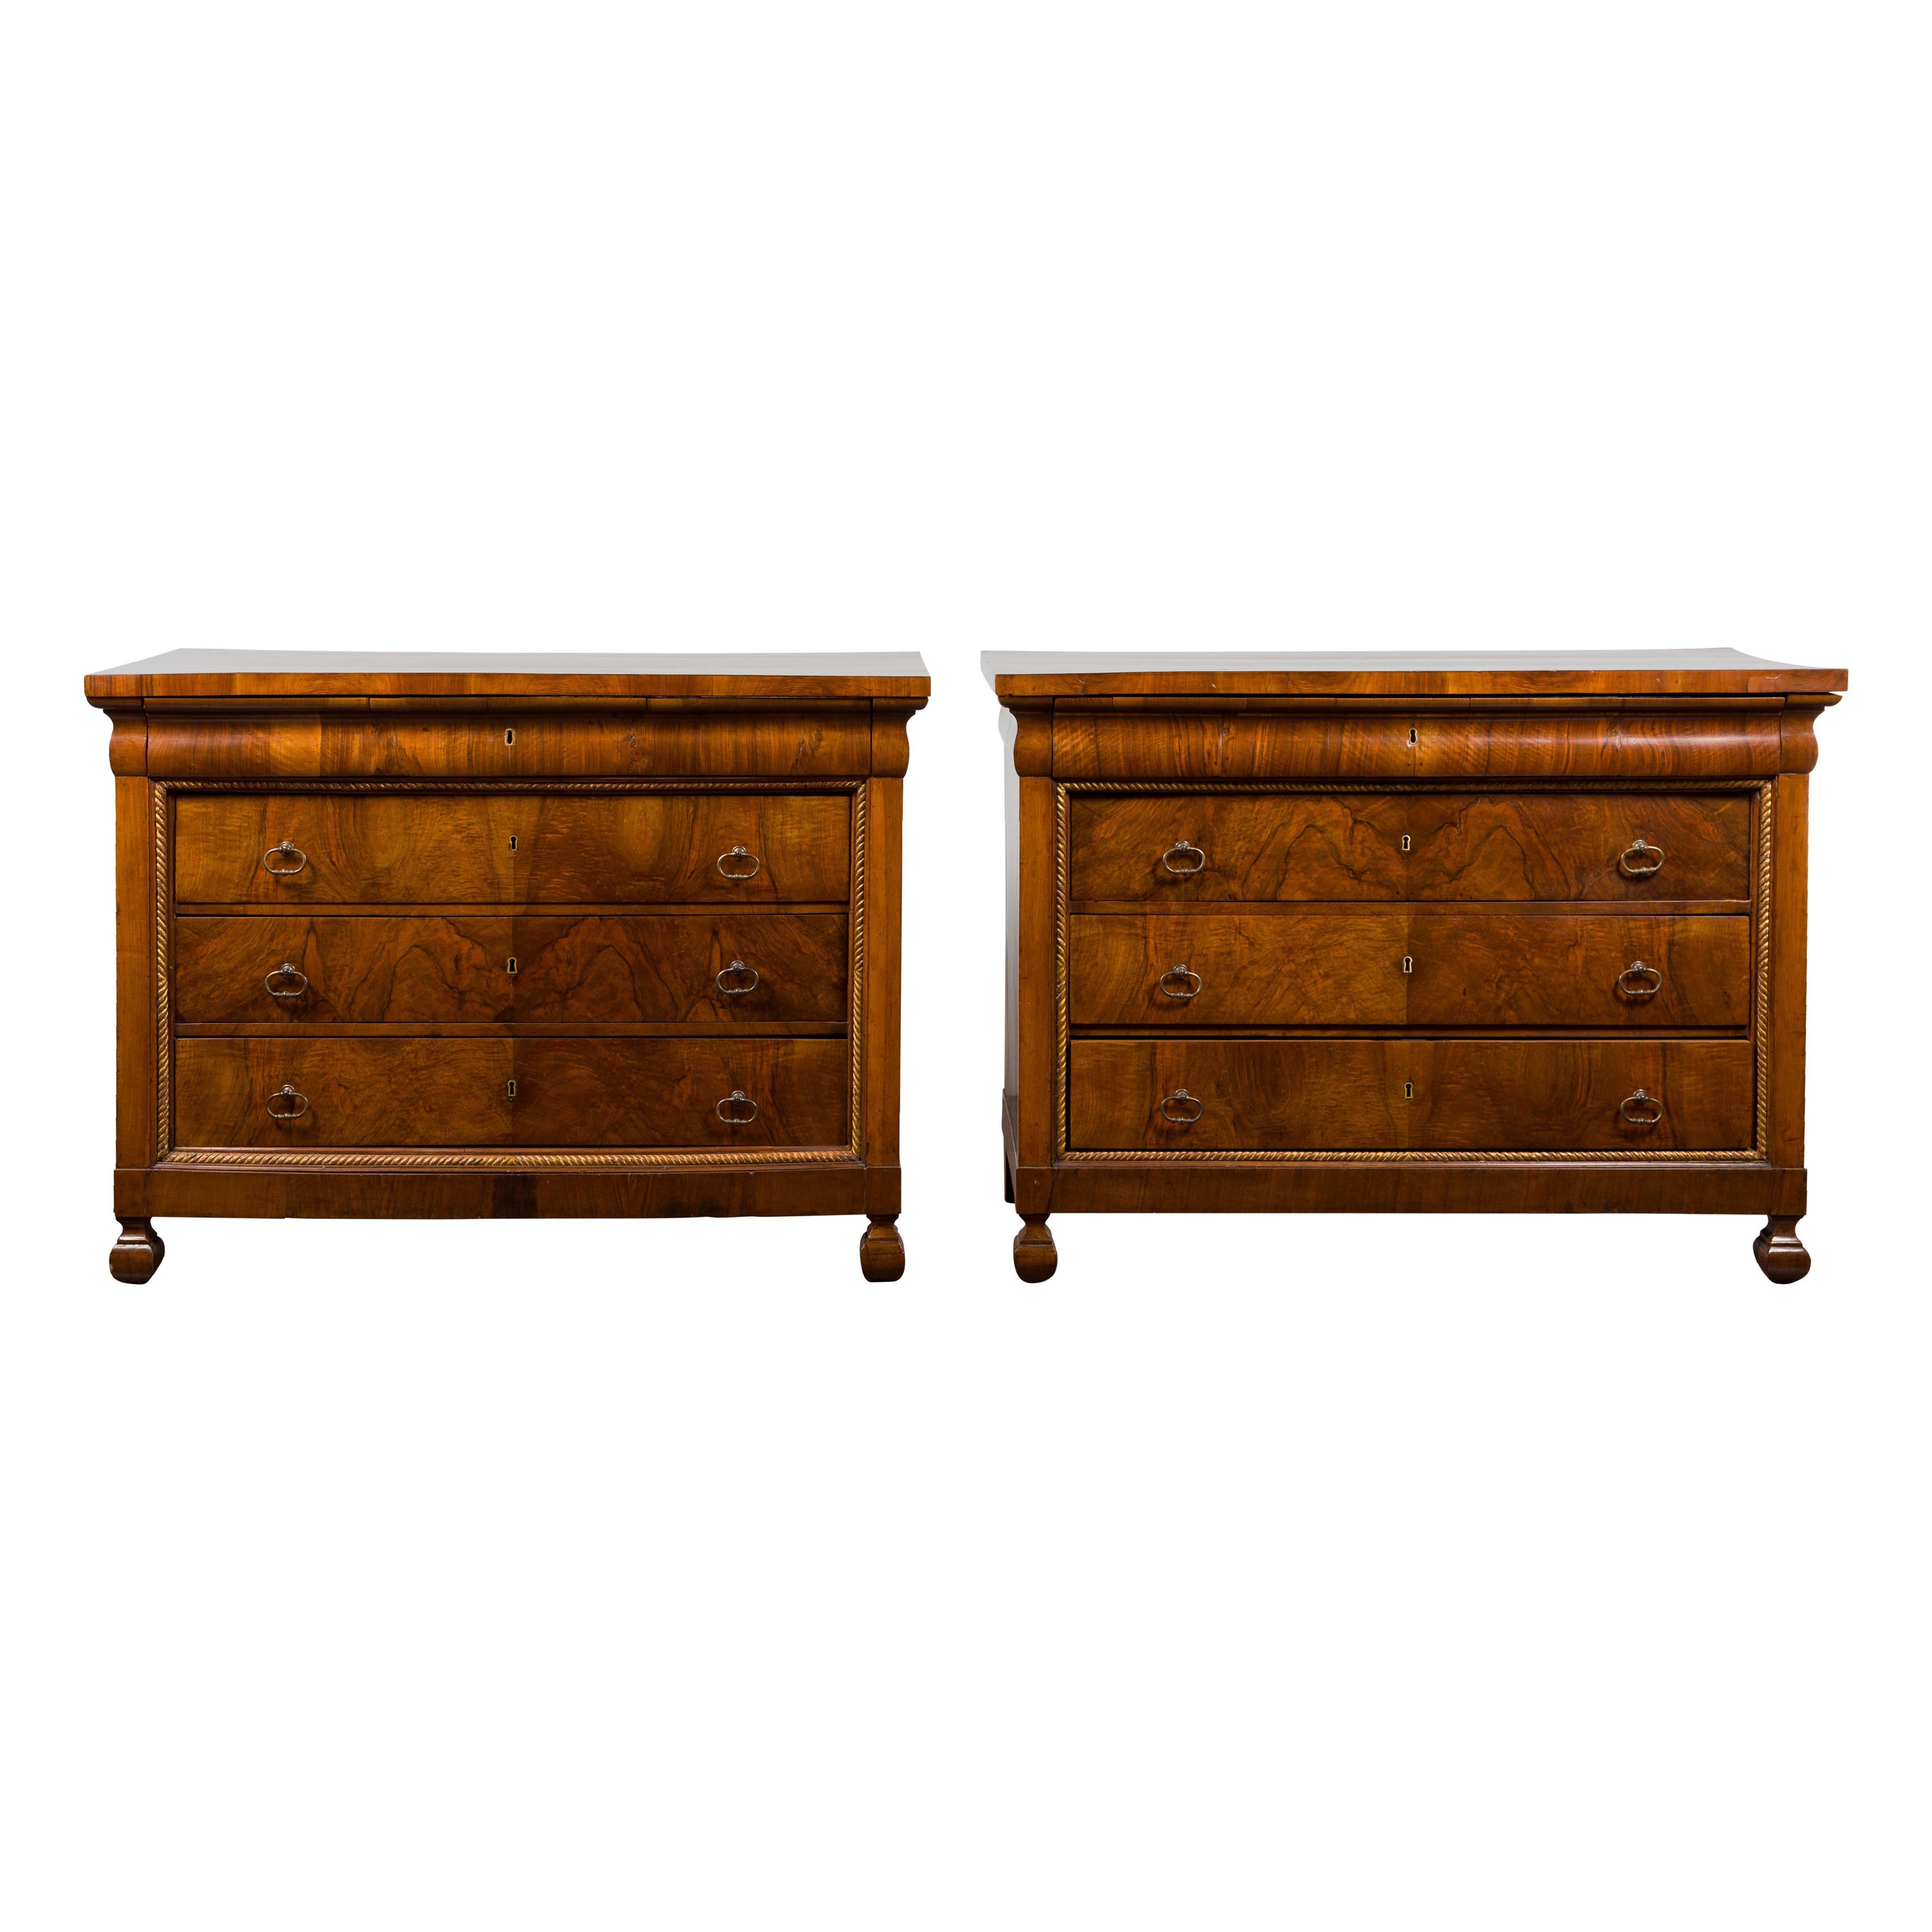 Pair of Italian 18th Century Walnut Four-Drawer Commodes with Bookmatched Veneer